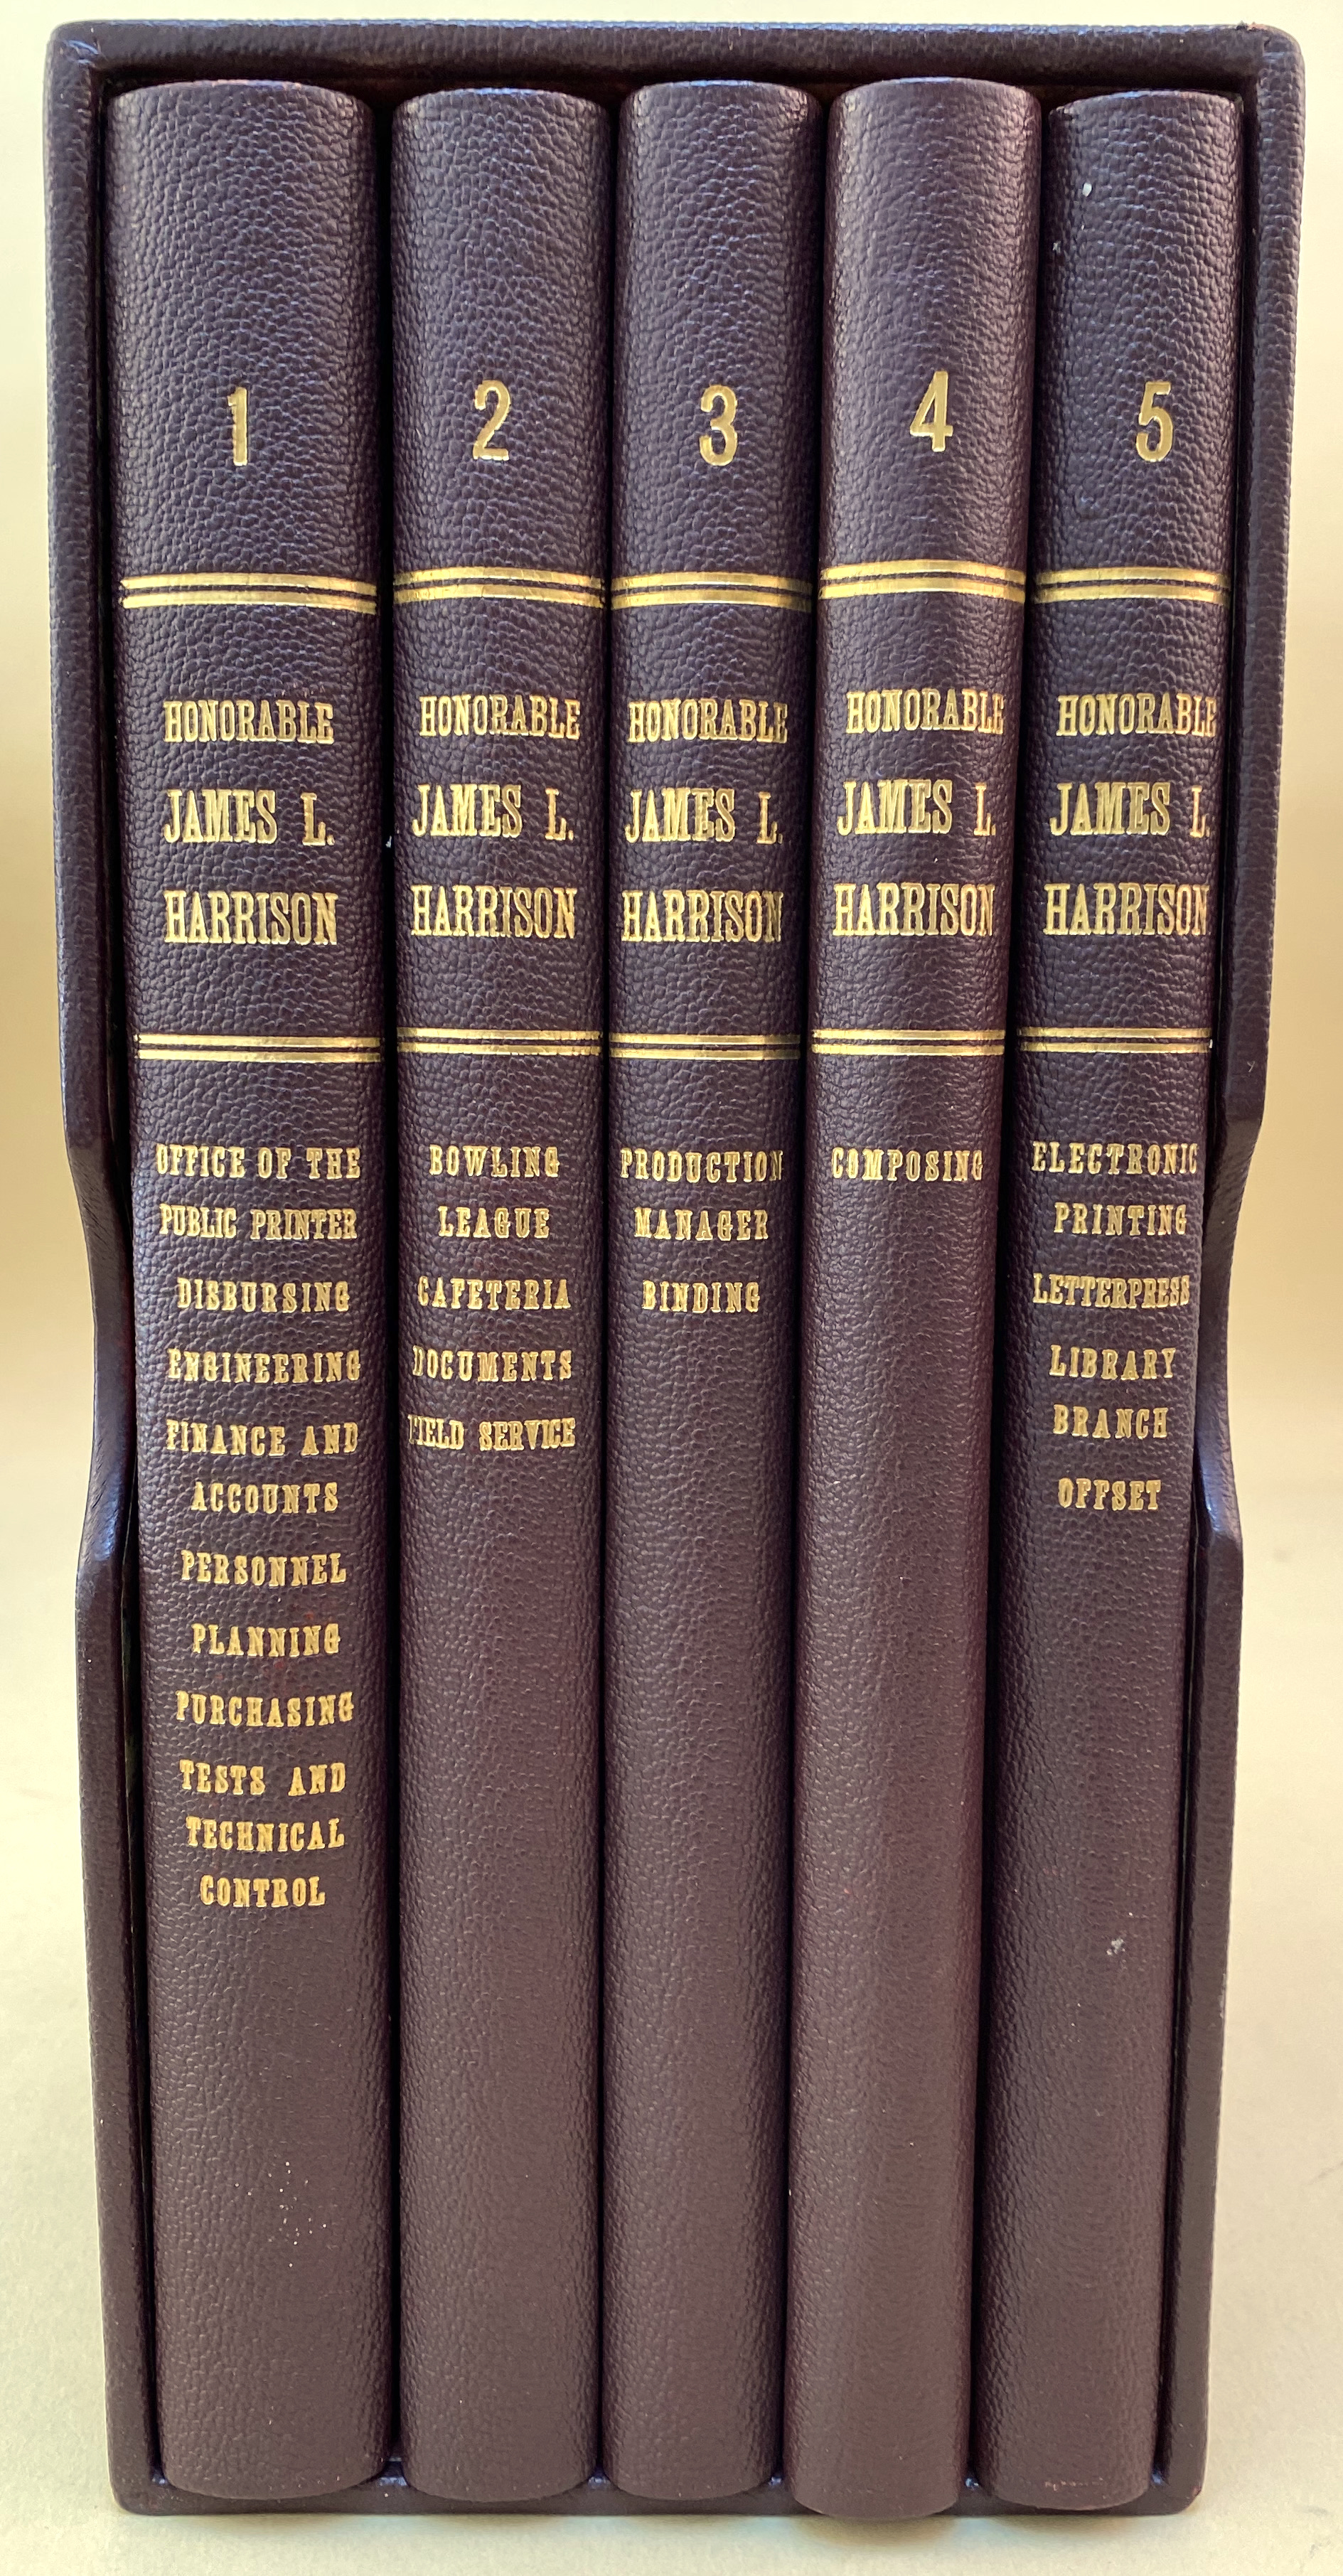 The unique set of books created and hand signed by all 5939 employees of the GPO for James L. Harrison upon his retirement as the Public Printer of the United States.